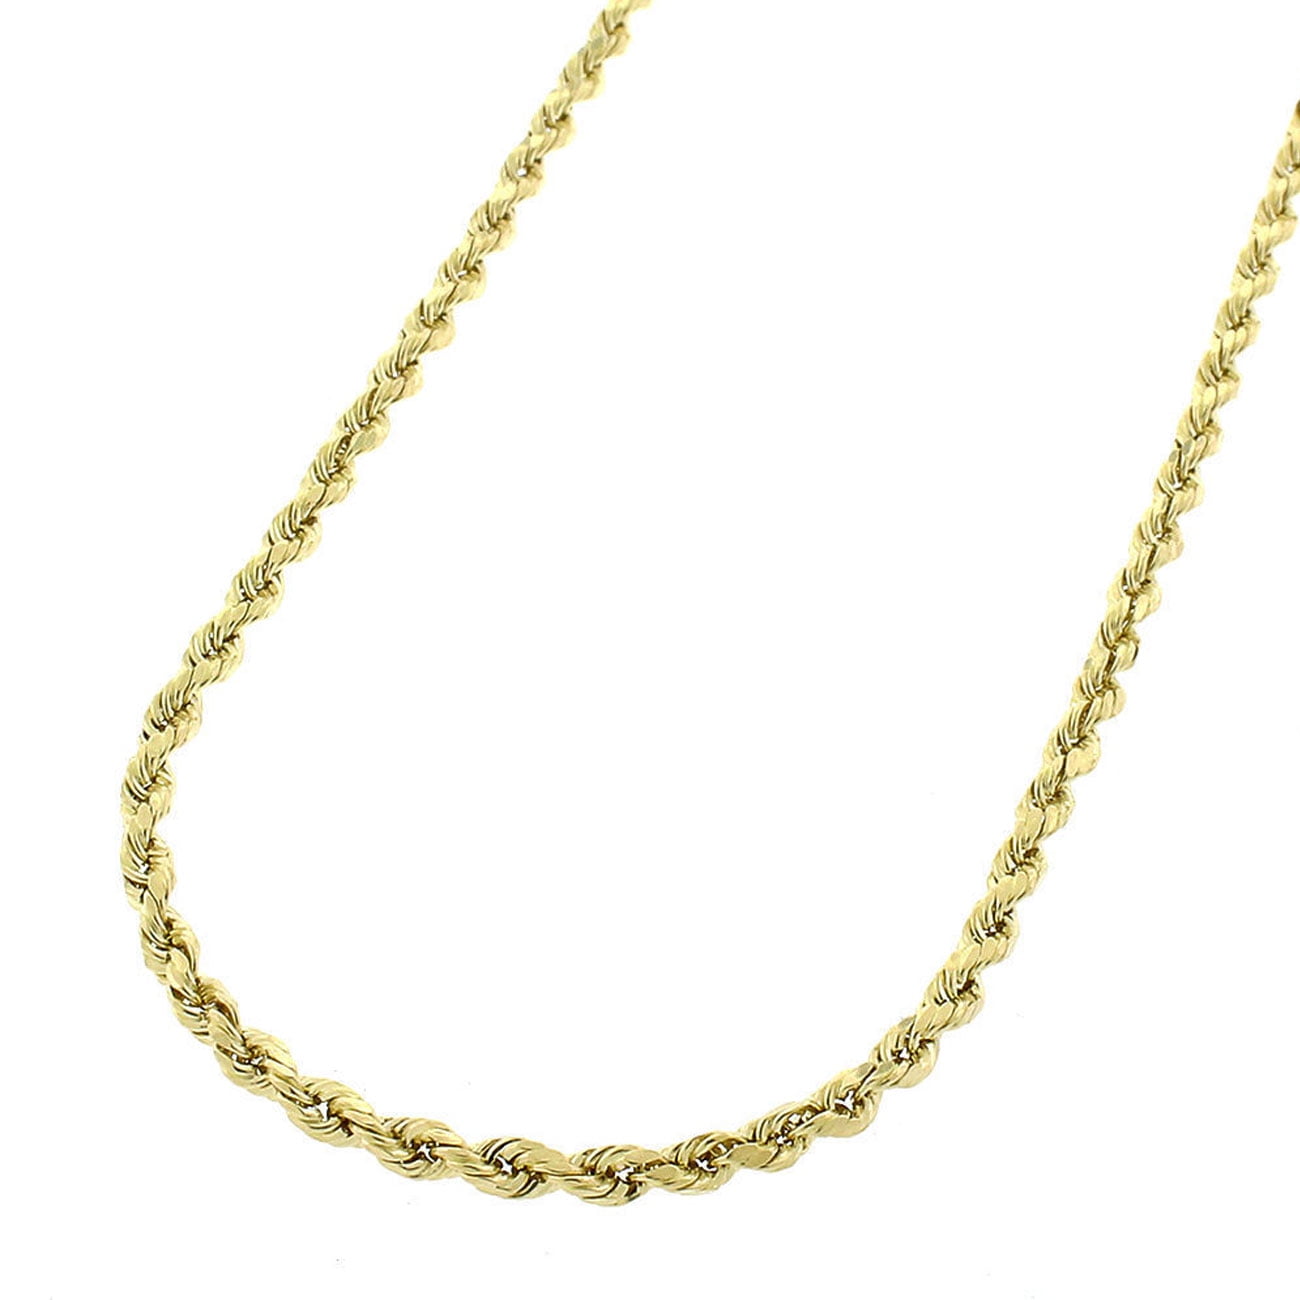 14K Yellow Gold Mens 2.5MM Solid Diamond Cut Ropes Chains Necklace 16 to 22 Inches, 16 Inches